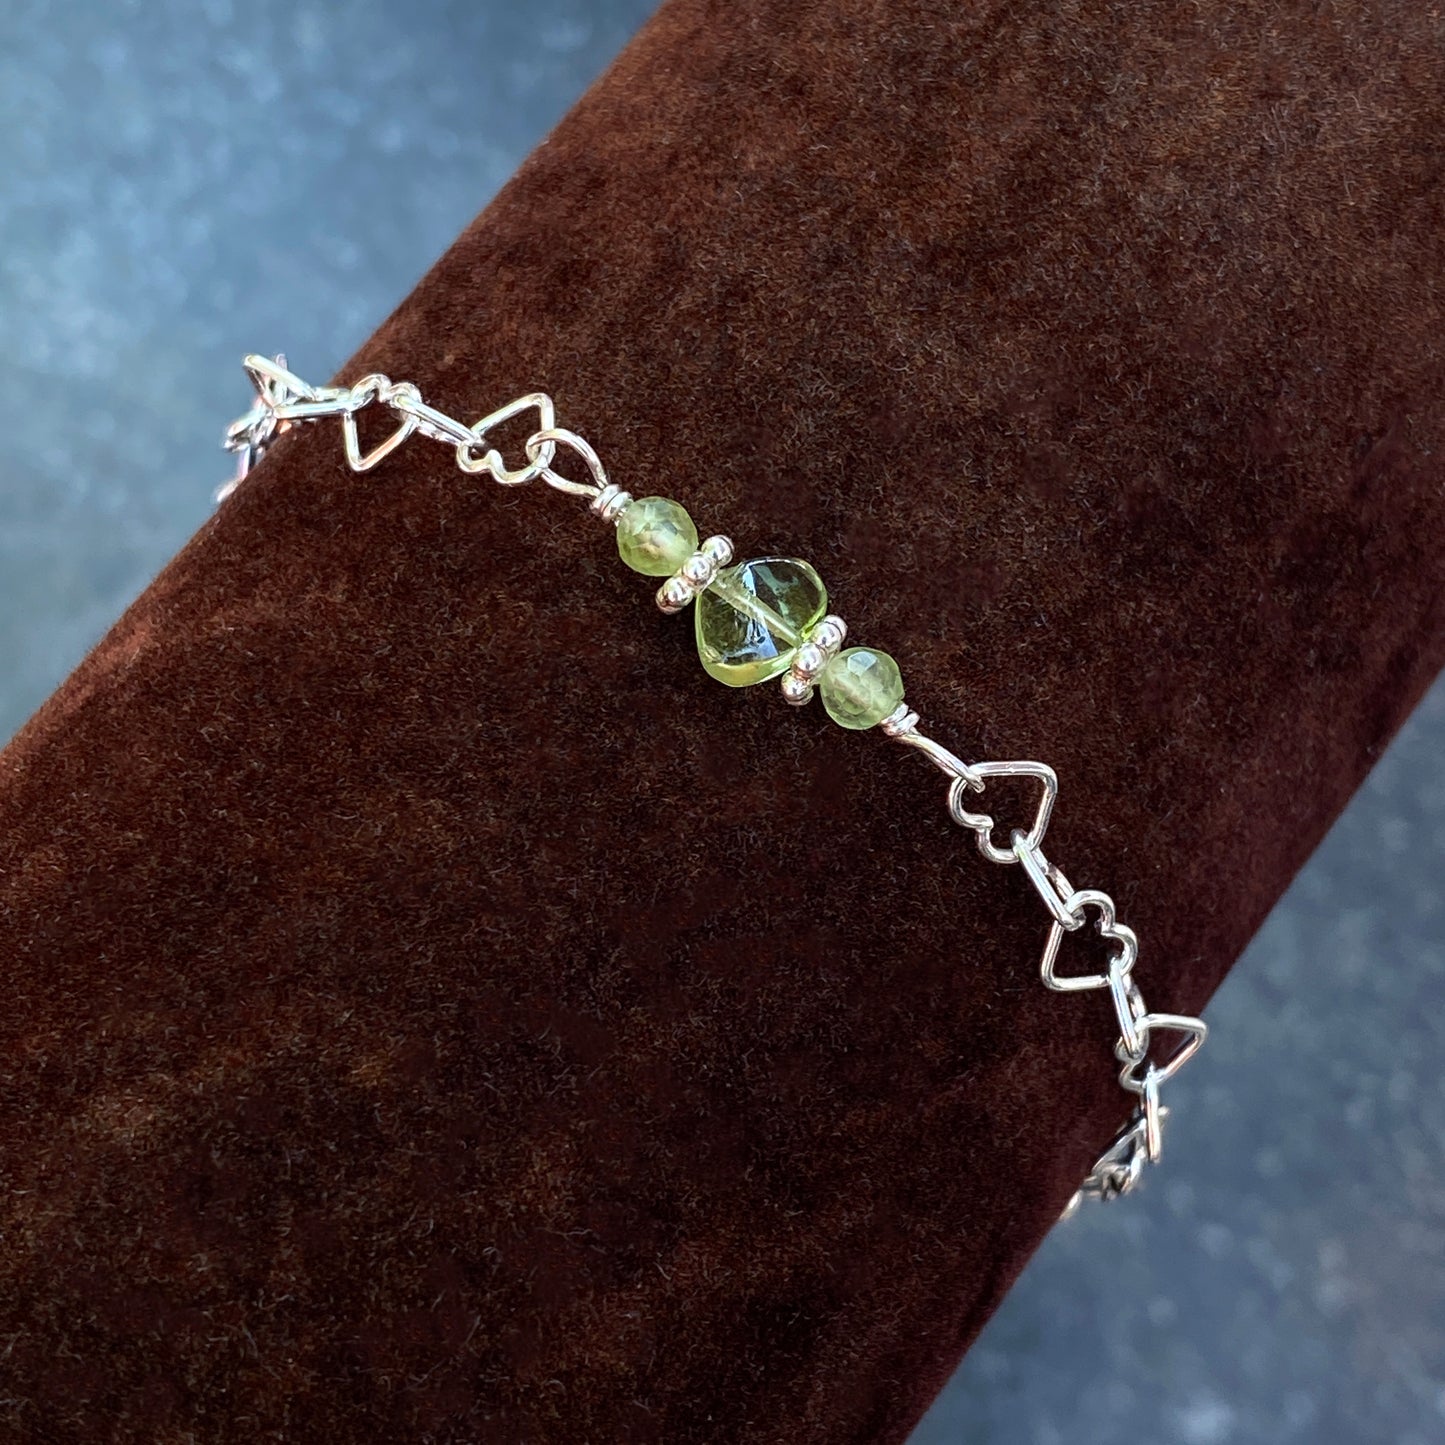 Peridot gemstone heart and silver heart chain bracelet with clasp